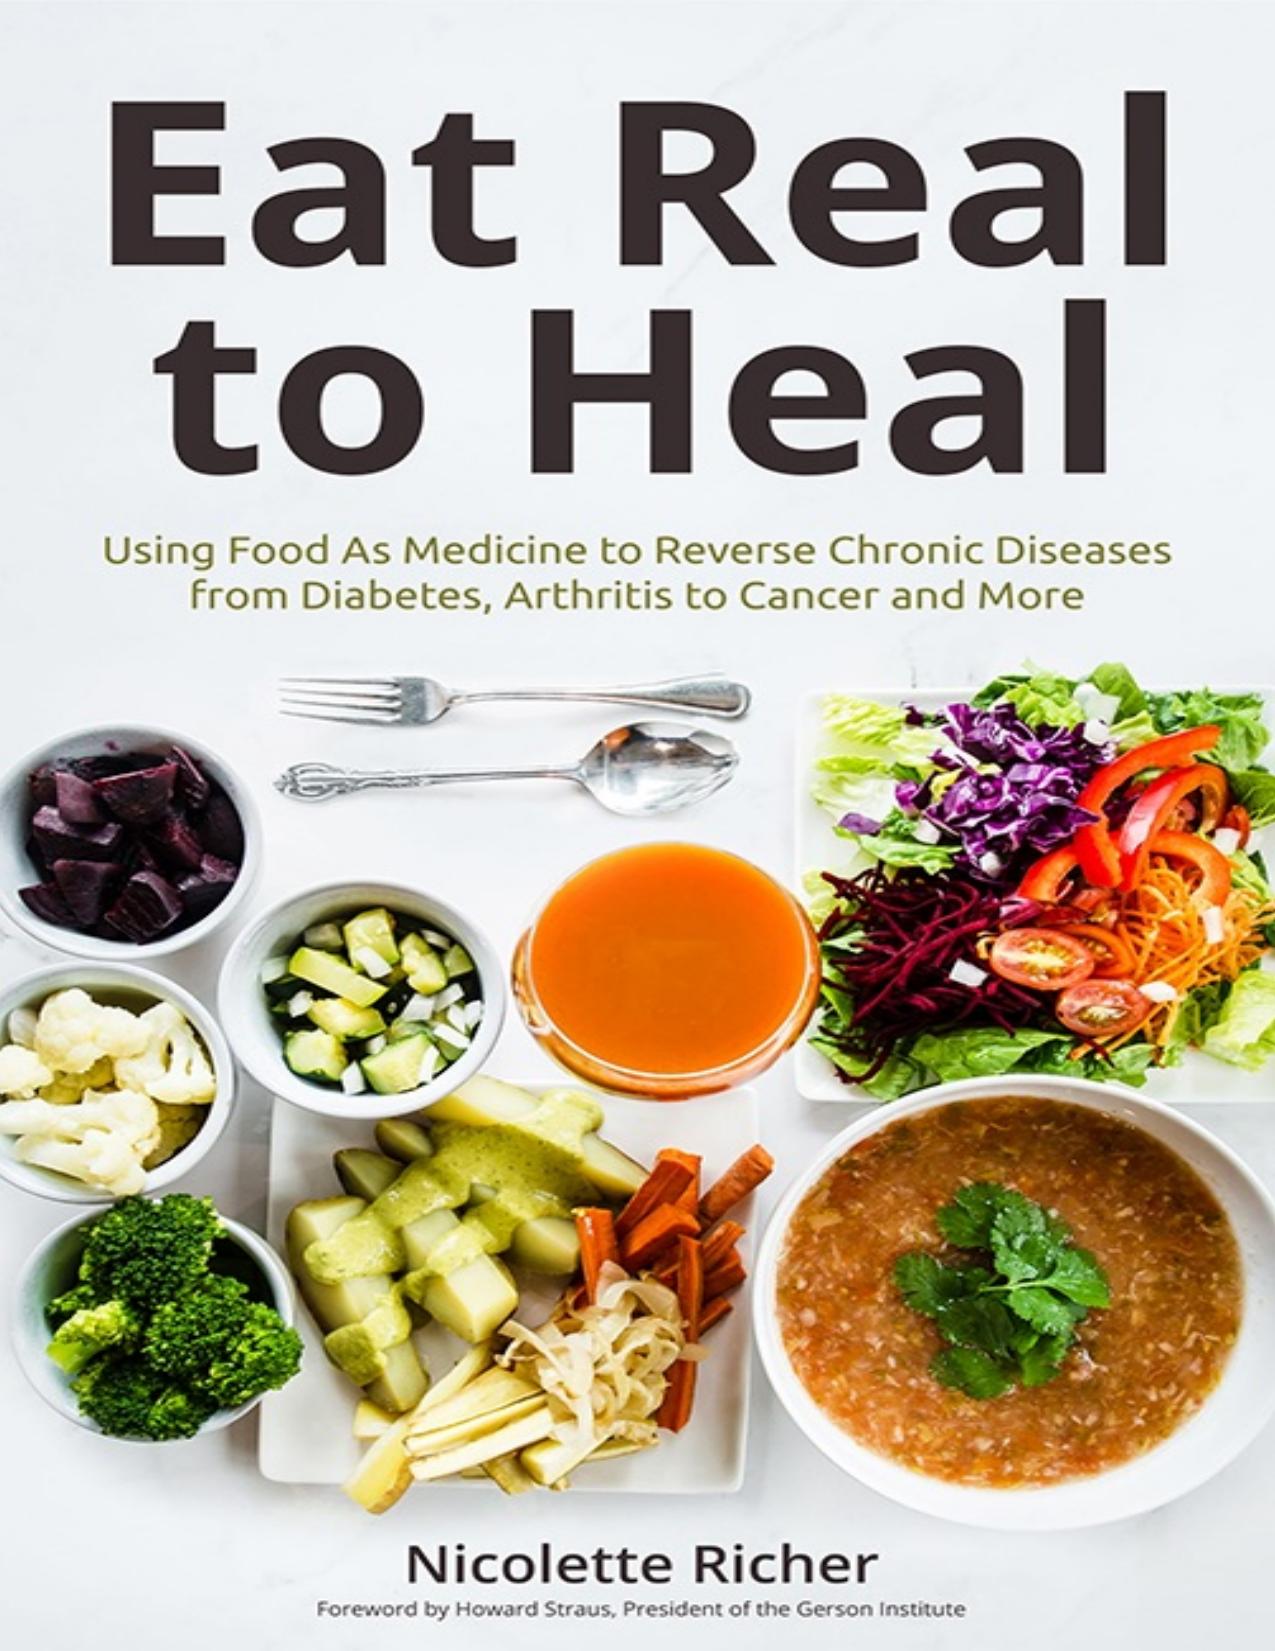 Eat Real to Heal Using Food As Medicine to Reverse Chronic Diseases from Diabetes, Arthritis, Cancer and More - PDFDrive.com